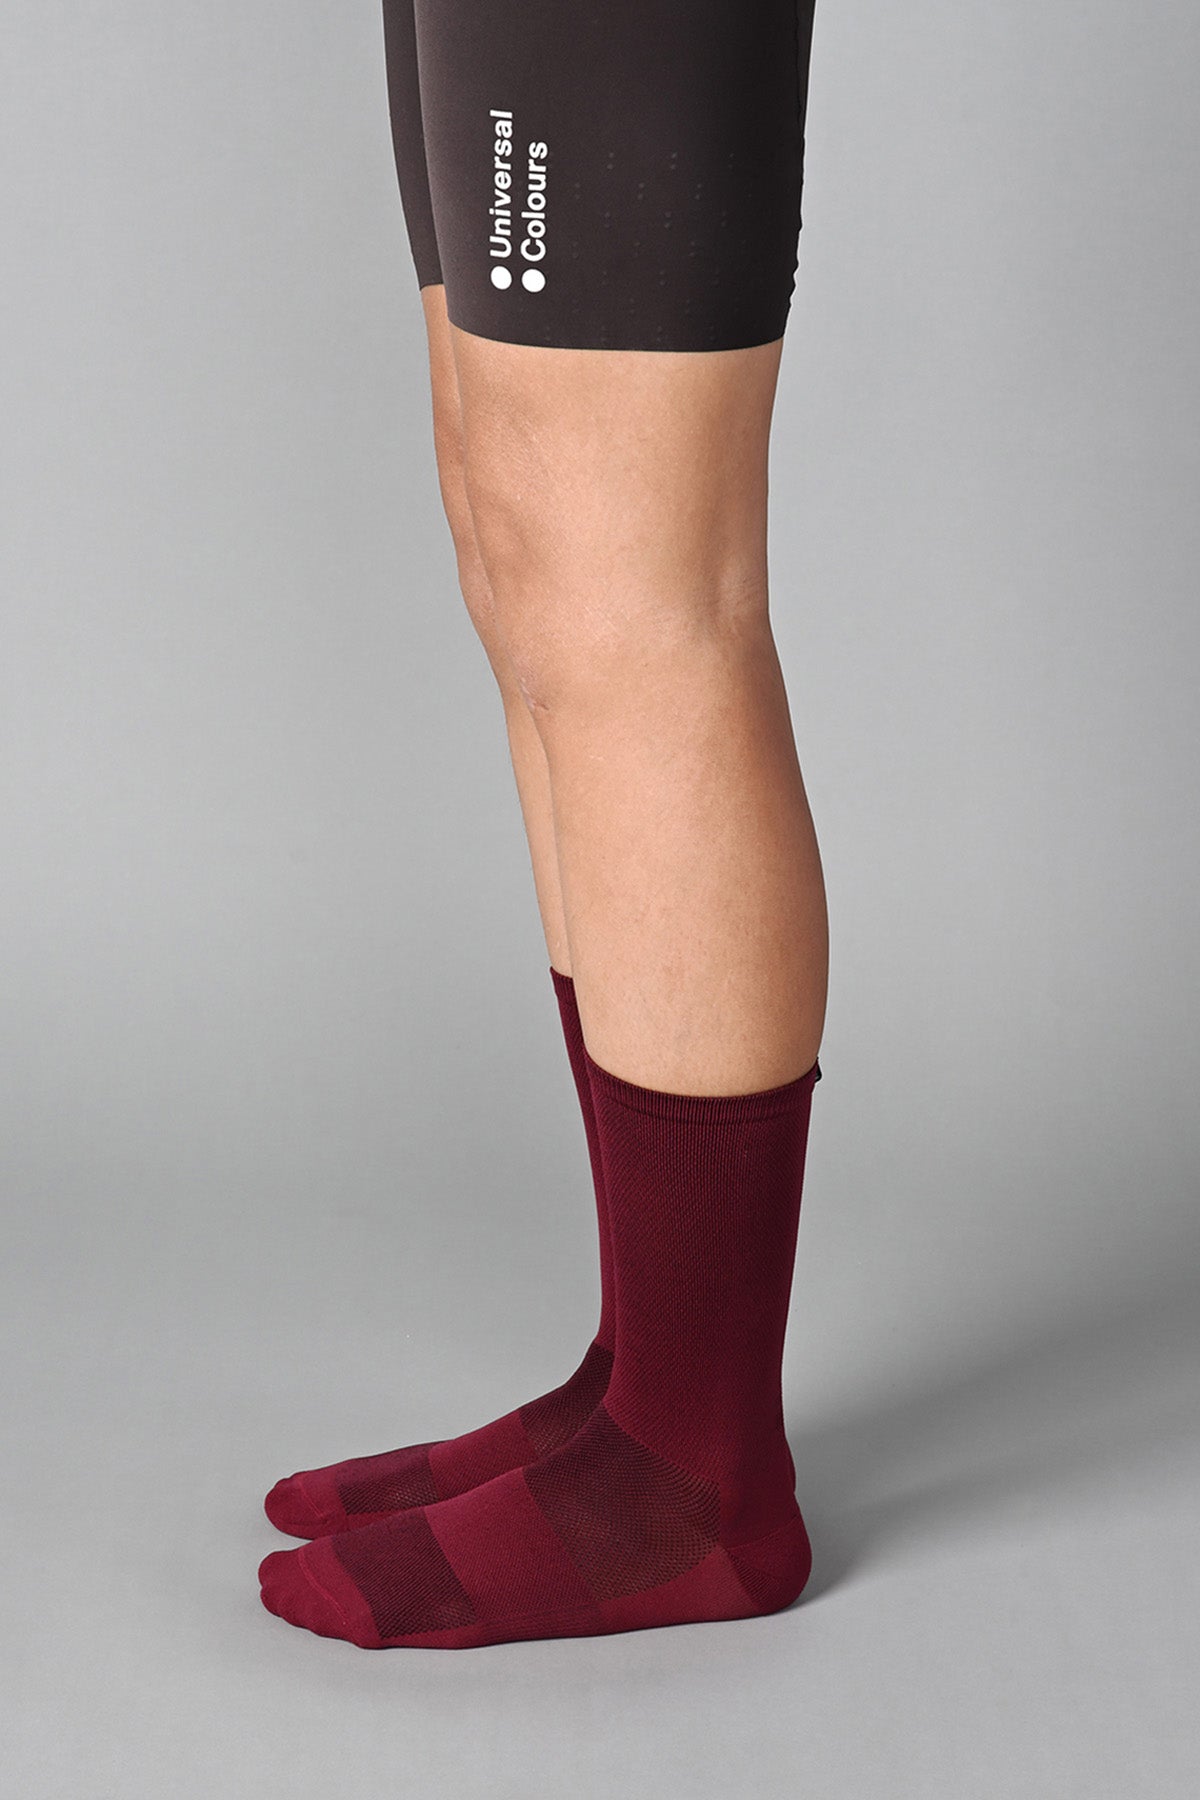 STEALTH - BARN RED SIDE | BEST CYCLING SOCKS